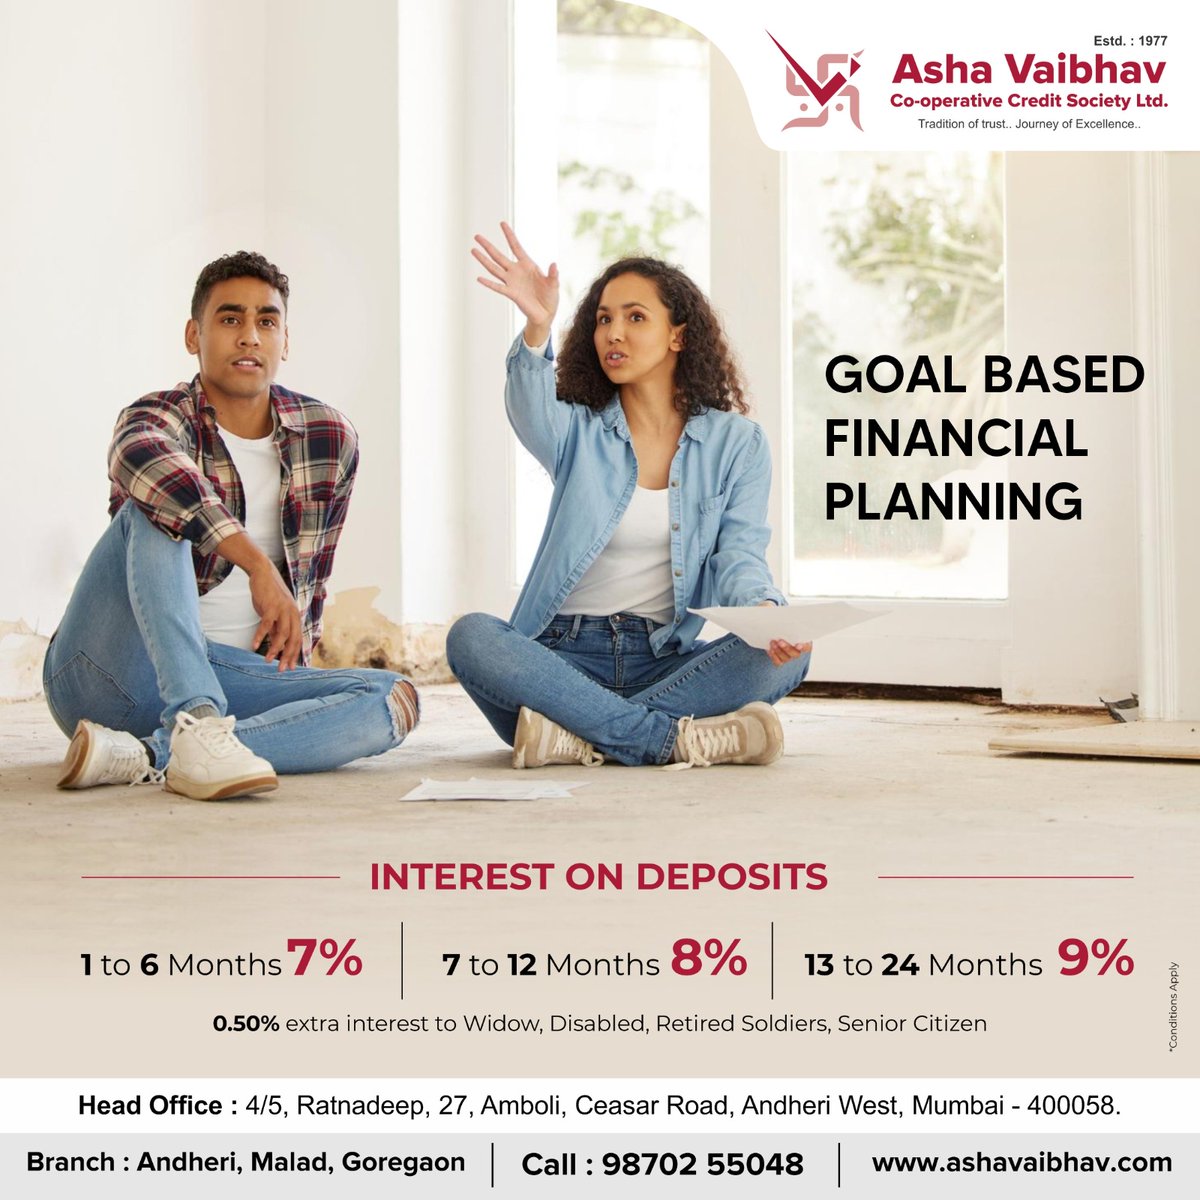 Goal based financial planning 

For more information visit our branch or call us on 9870255048

#investment #banking #personalfinance 
#finance #ashavaibhavcreditsociety  #currentaccount #savingaccount #andheriwest #andheri #AshaVaibhav #InvestingForTheFuture